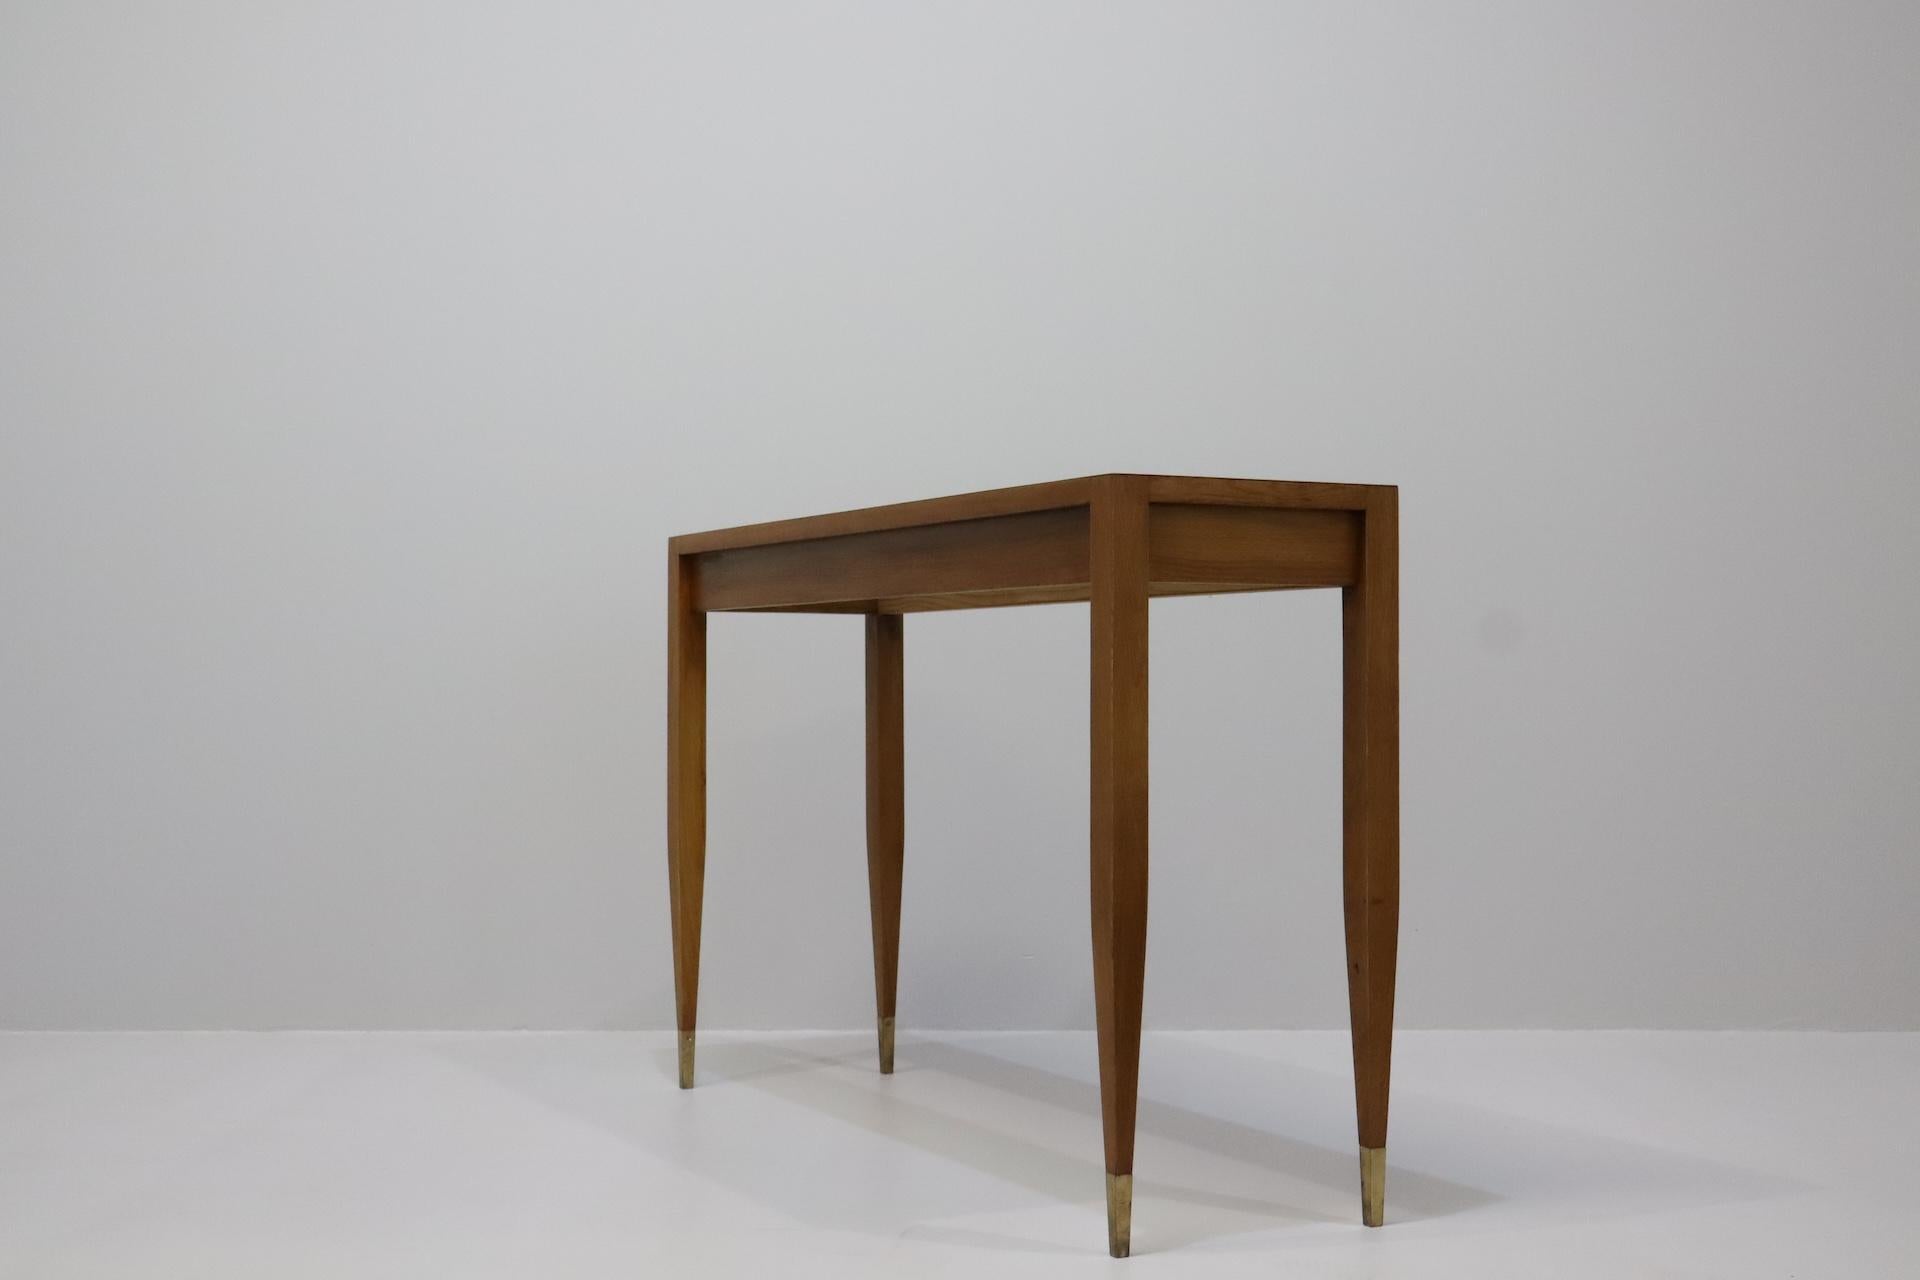 Pair Gio Ponti Consoles for Giordano Chiesa Italy, 1964 For Sale 5